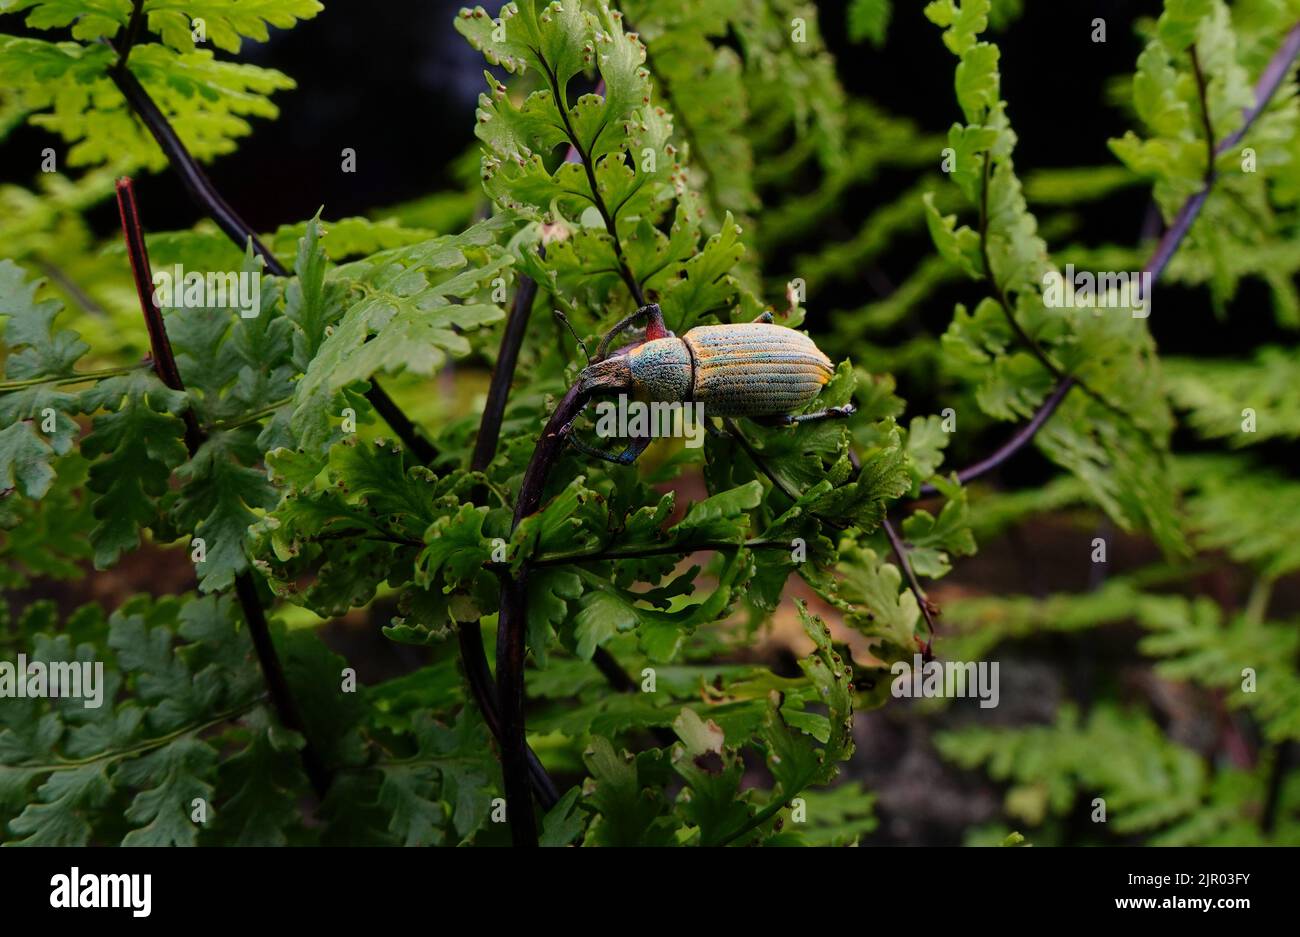 White pine weevil on the leaf with cut leaf. It is pest of various crop plants and ornamental plants which damage the leaves by feeding. Stock Photo